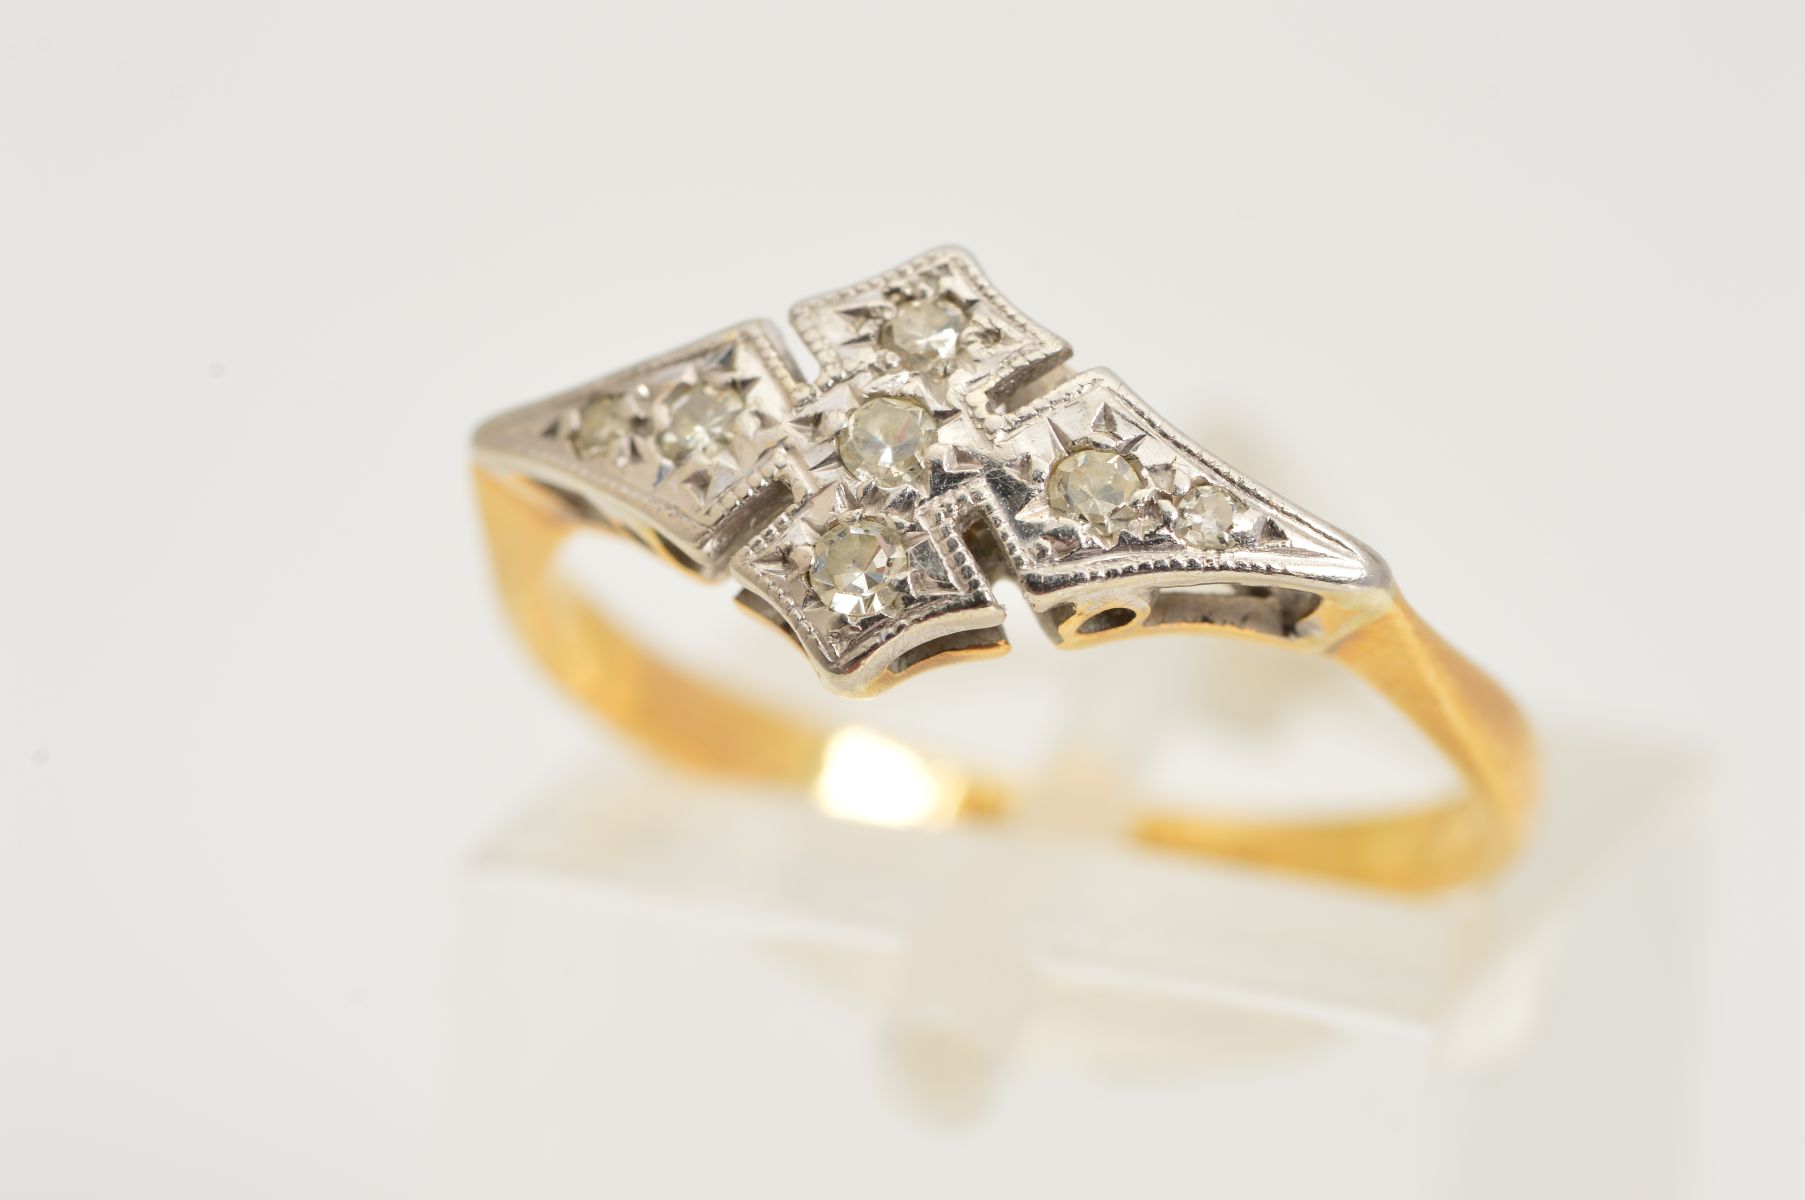 AN EARLY 20TH CENTURY DIAMOND RING, designed as four single cut diamonds in illusion settings to the